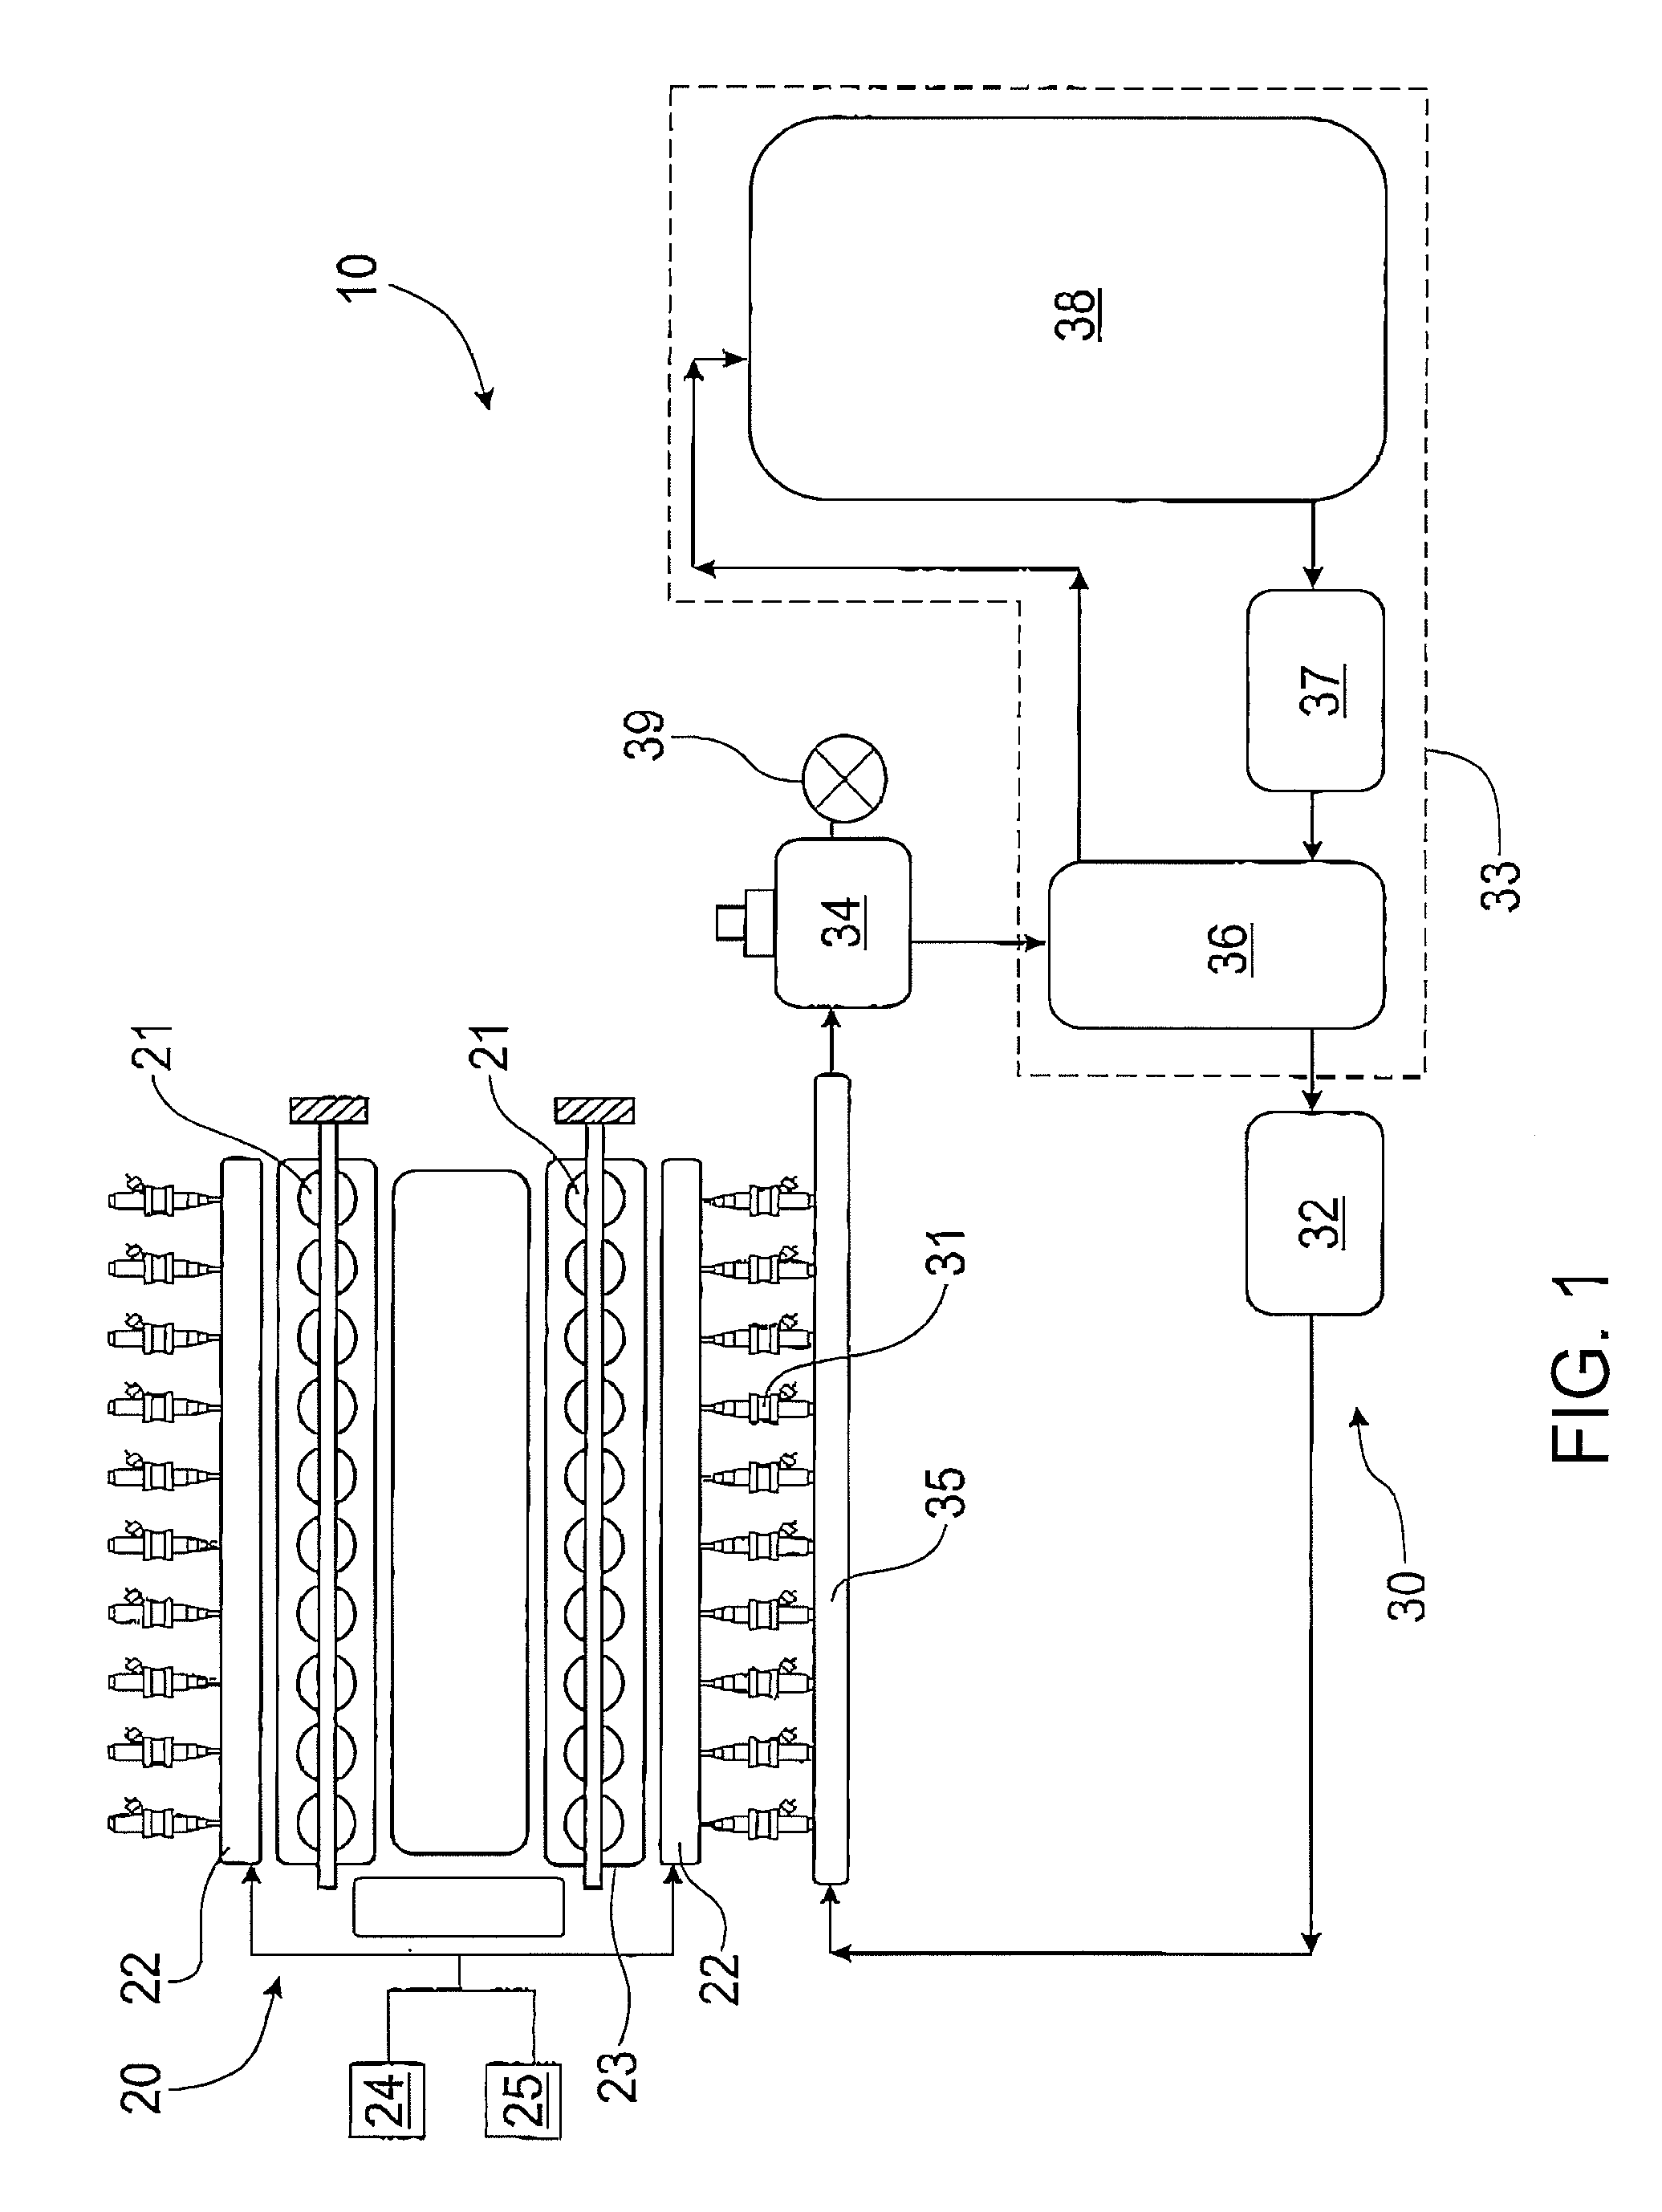 System and method for engine lubrication